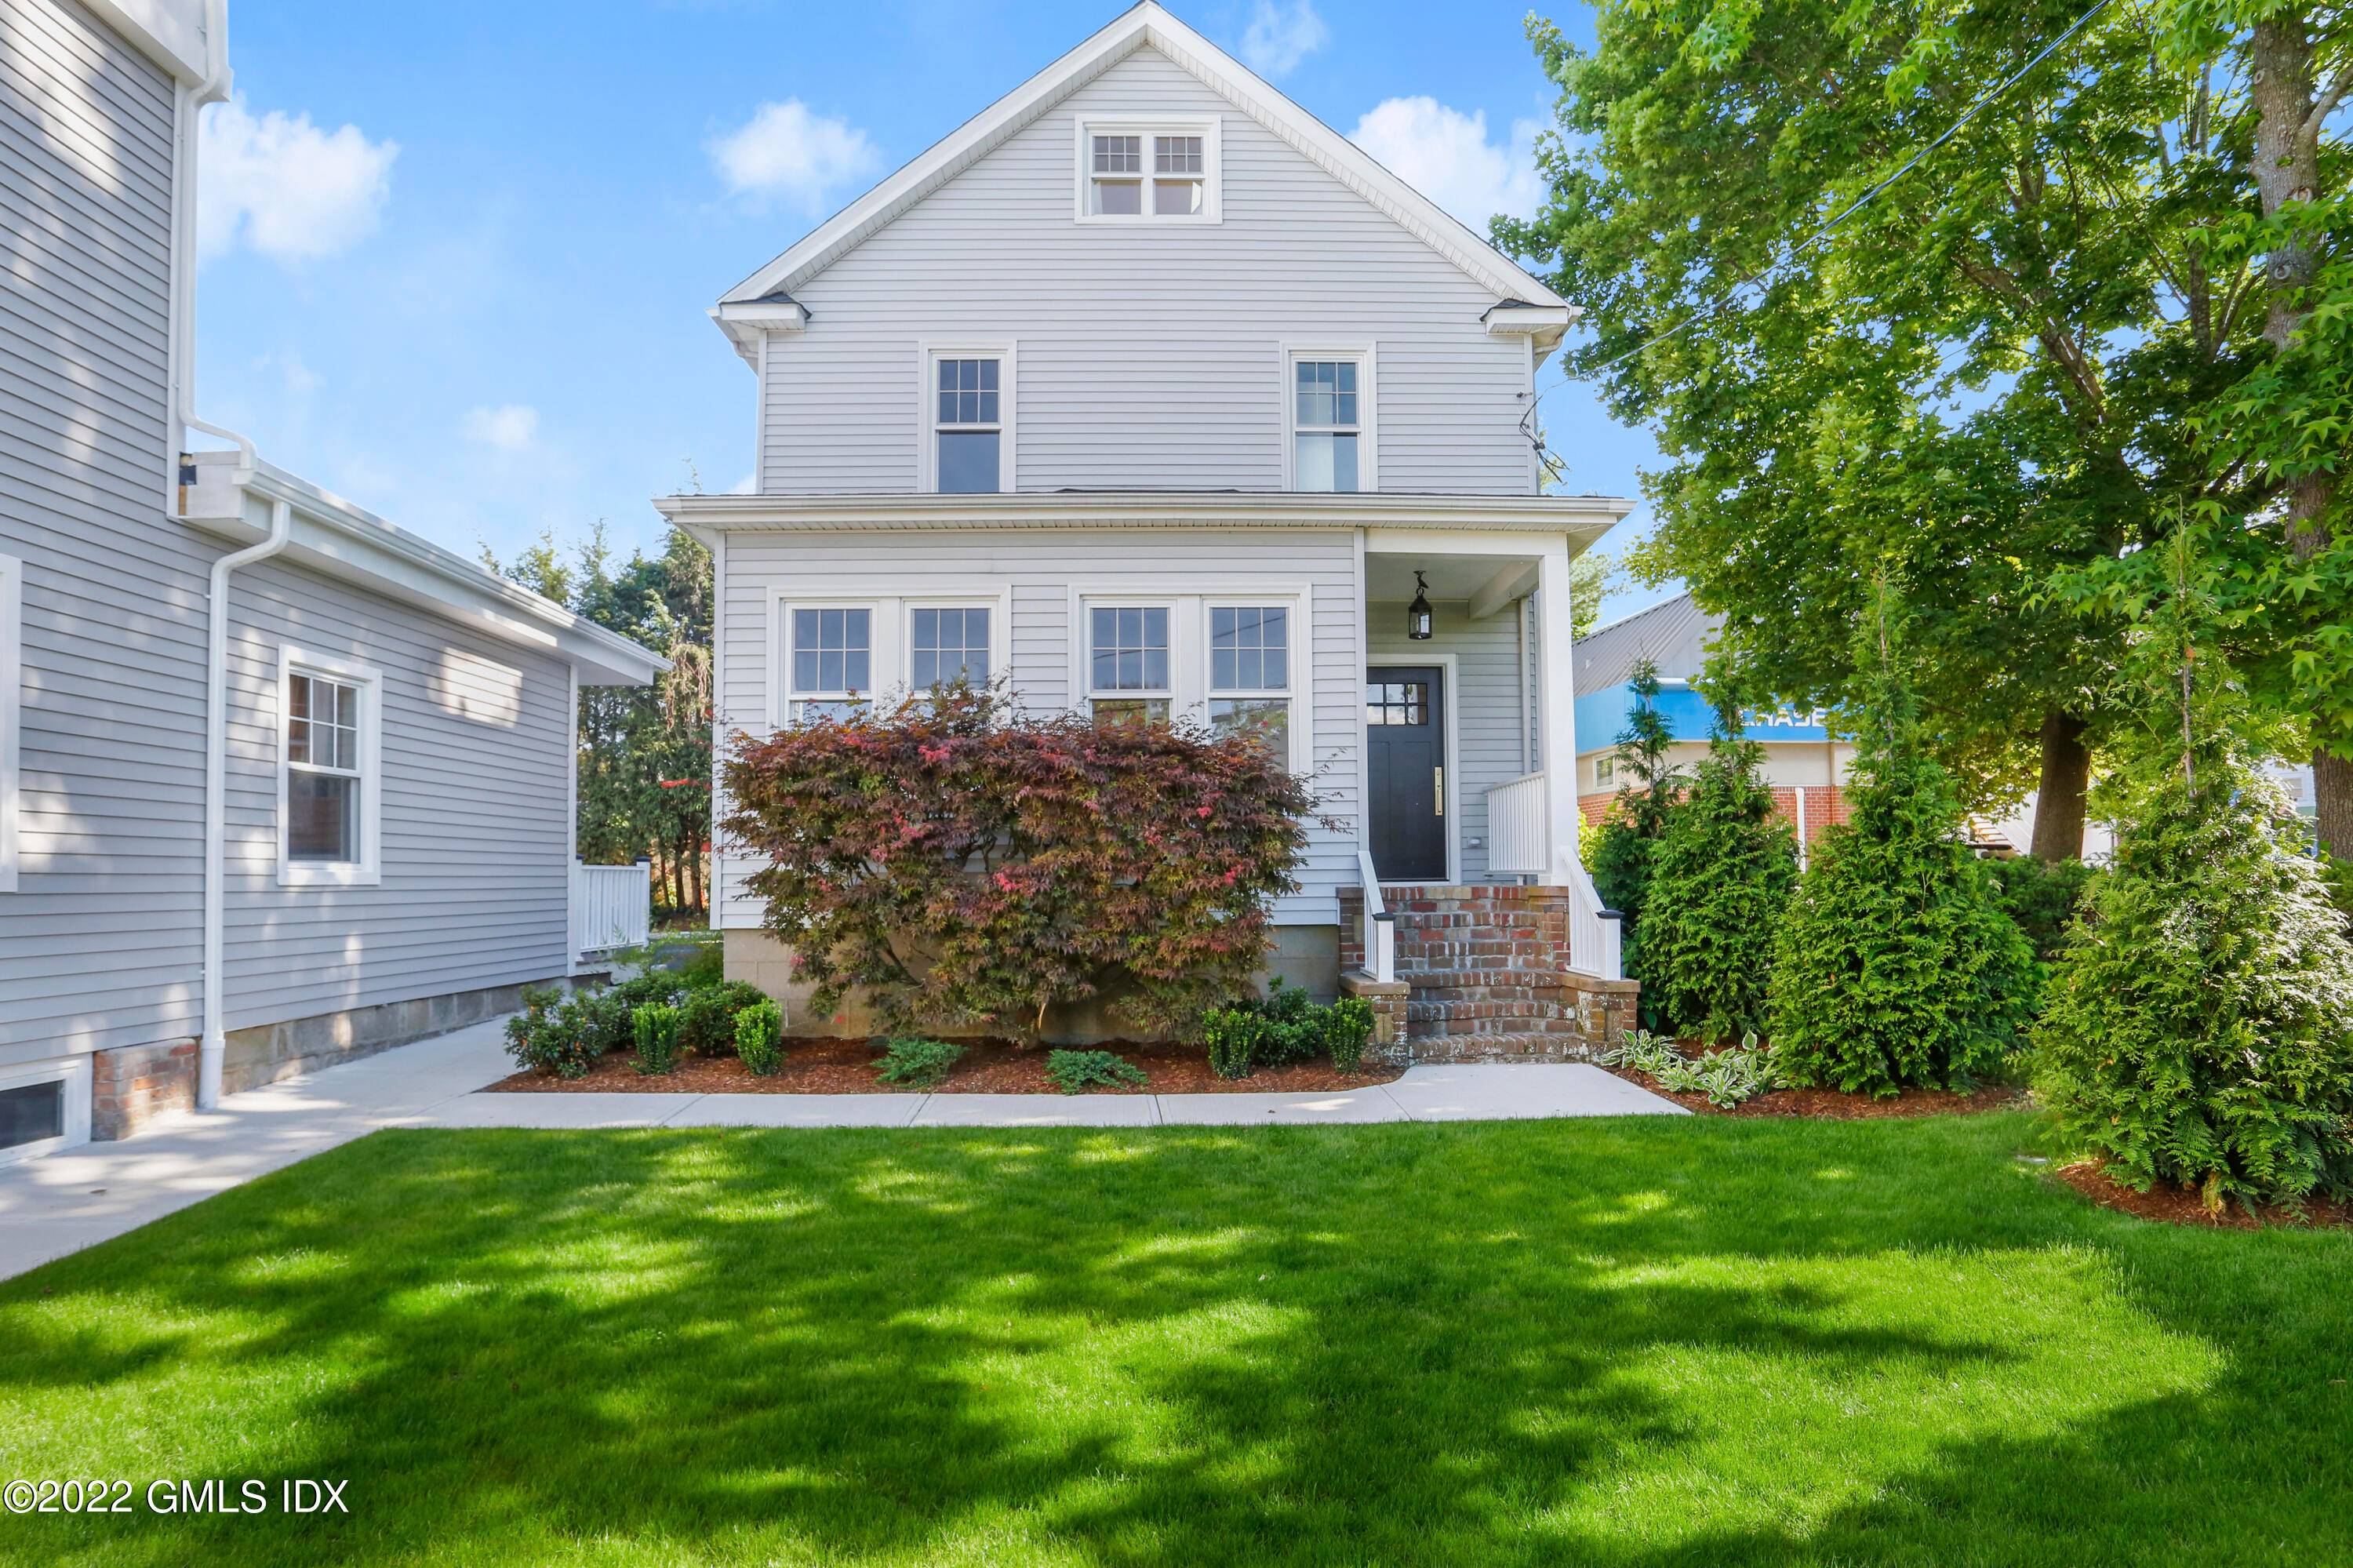 This absolutely charming, completely renovated 4 Bedroom, 2 Full and 2 Half Bath energy efficient single family home is just what you've been waiting for.